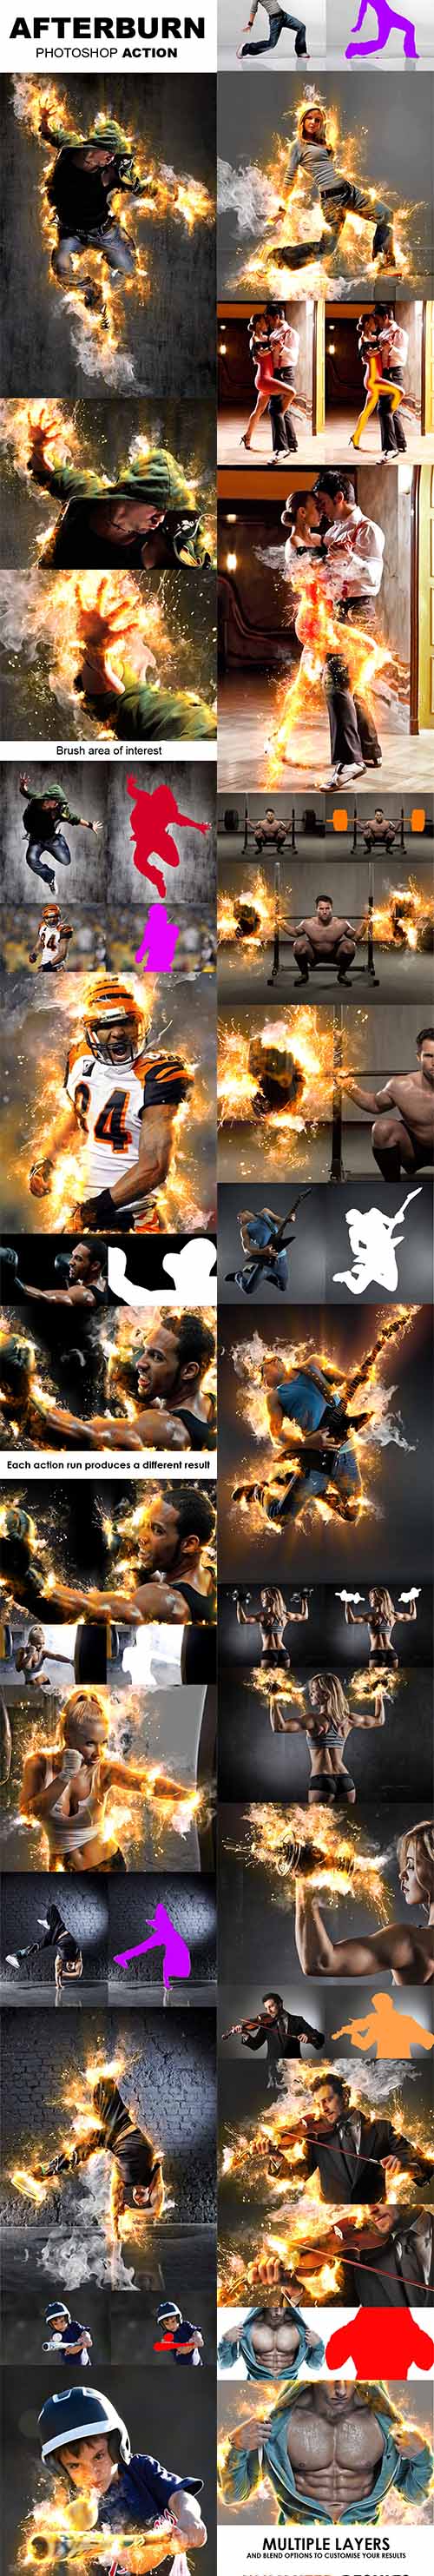 GraphicRiver - AfterBurn Photoshop Action 11008301